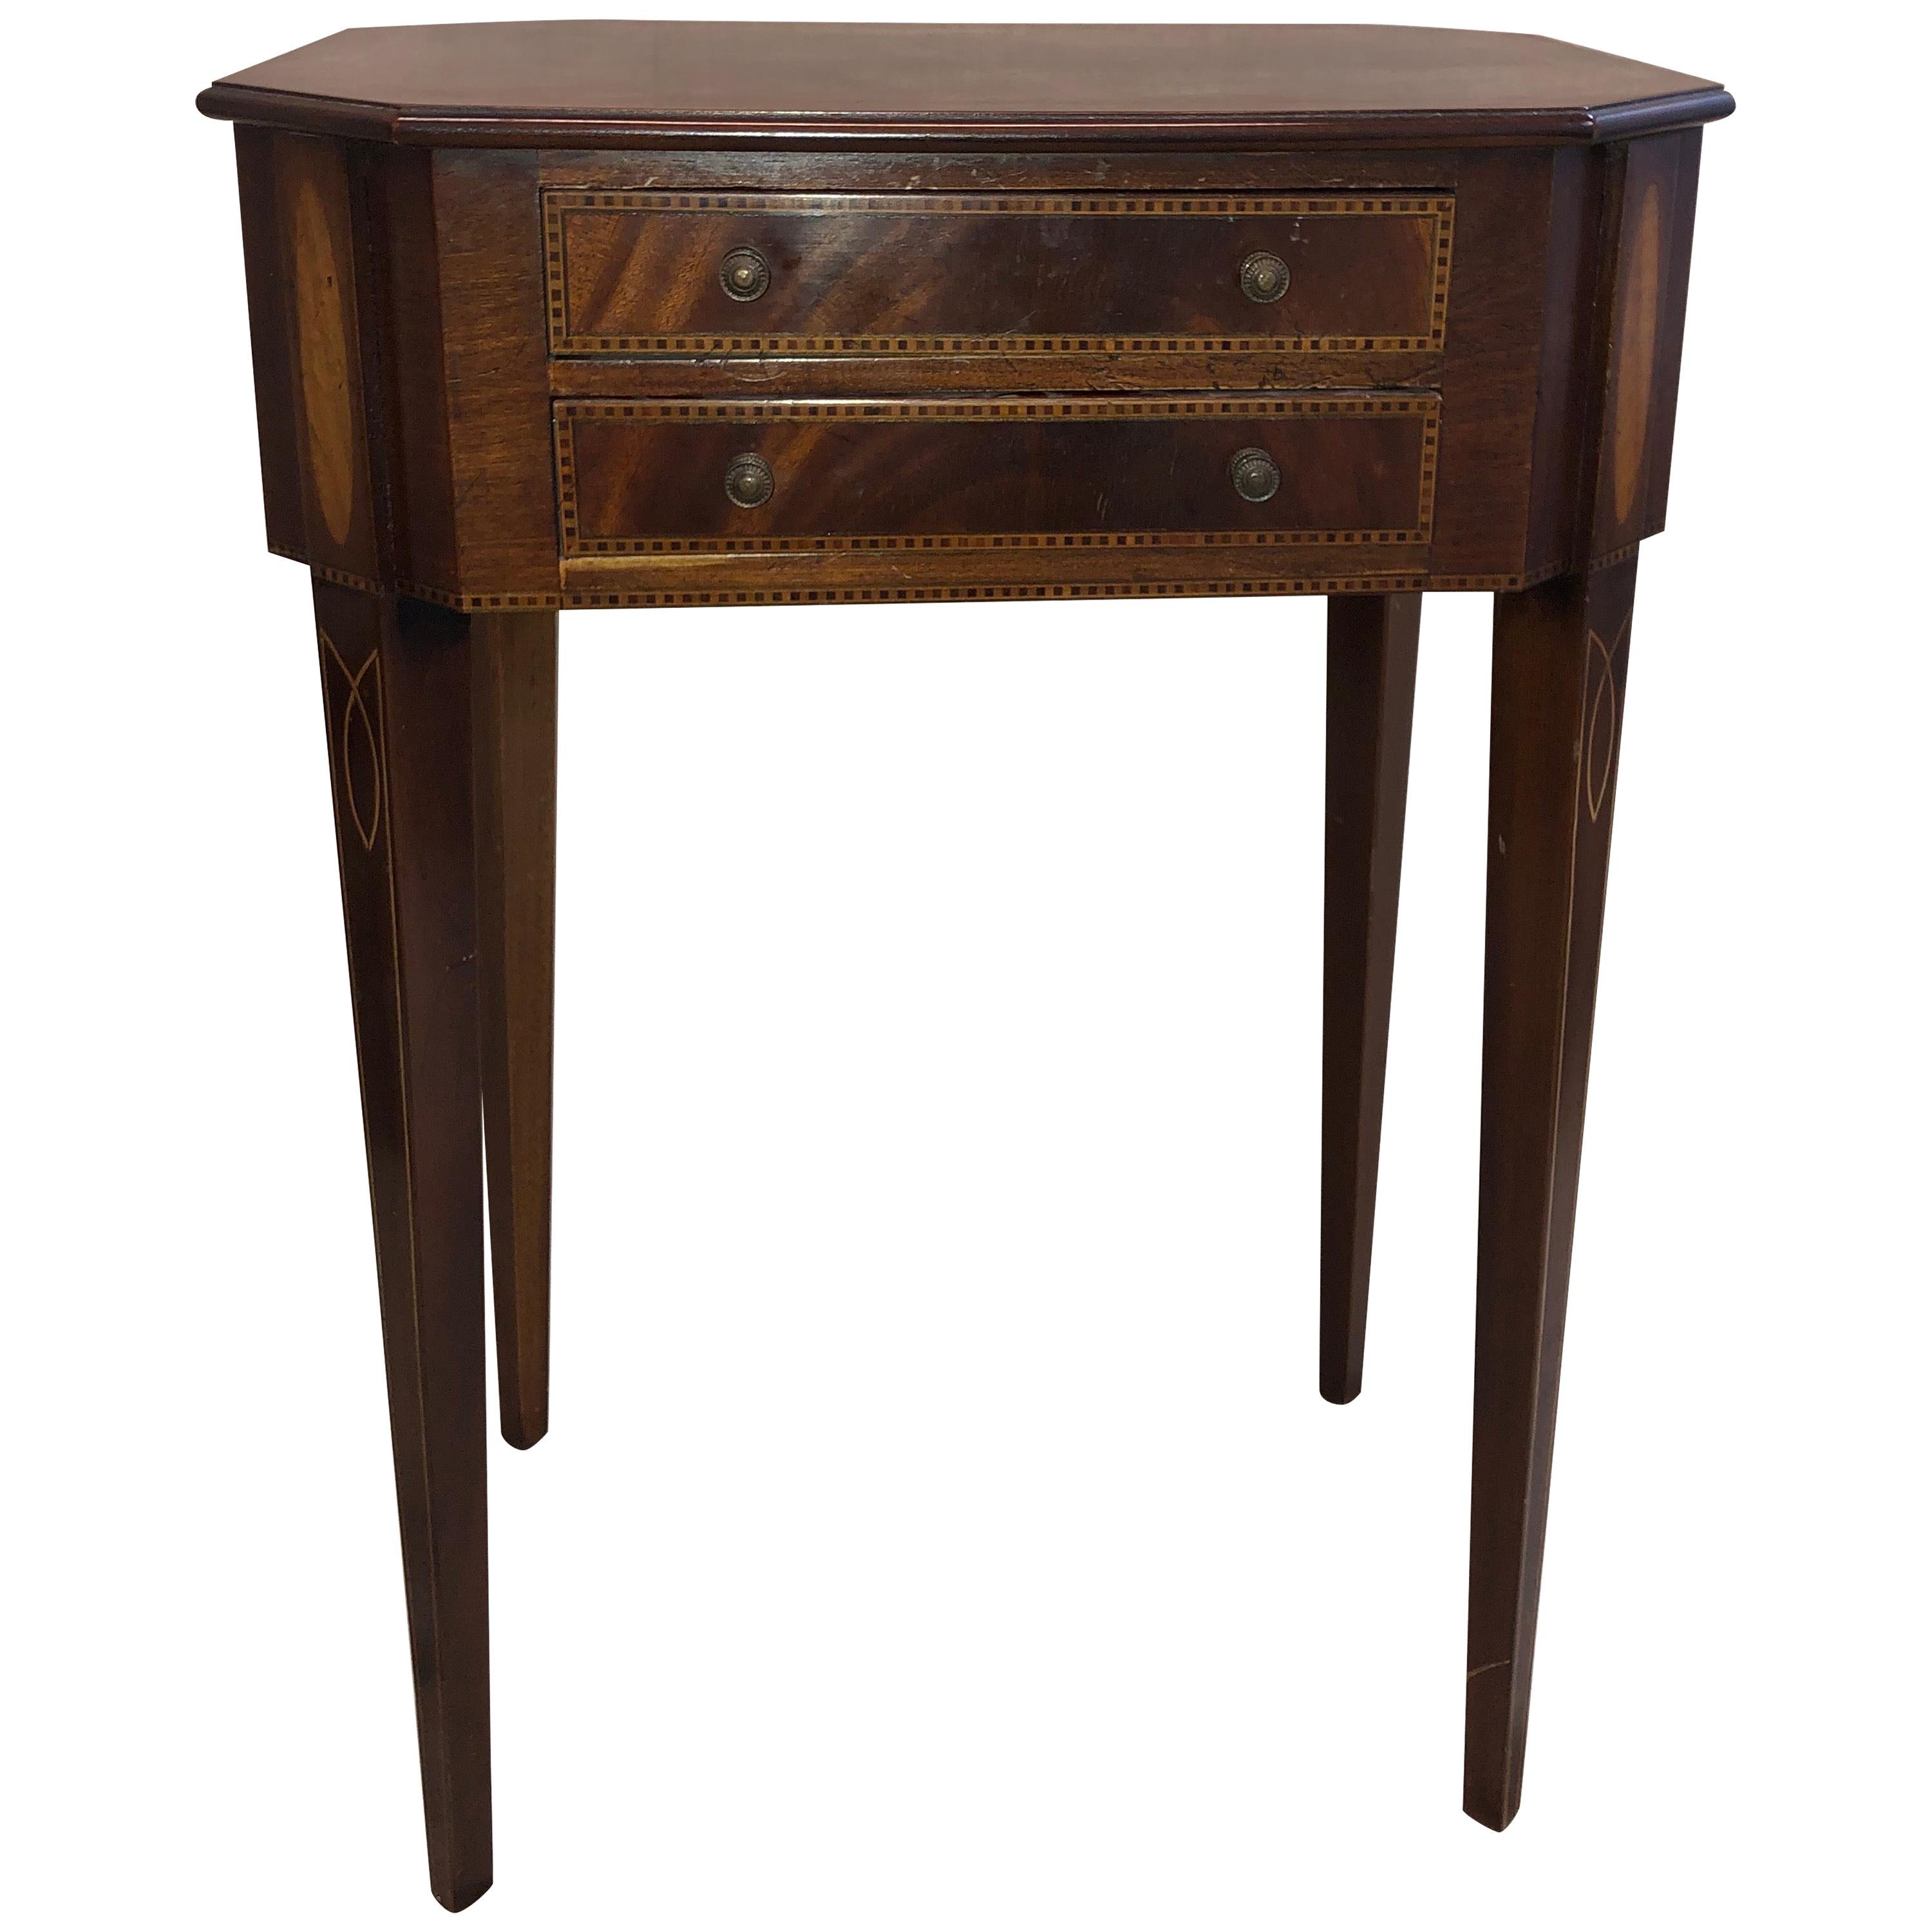 Antique Inlaid Sheraton End Table/Nightstand